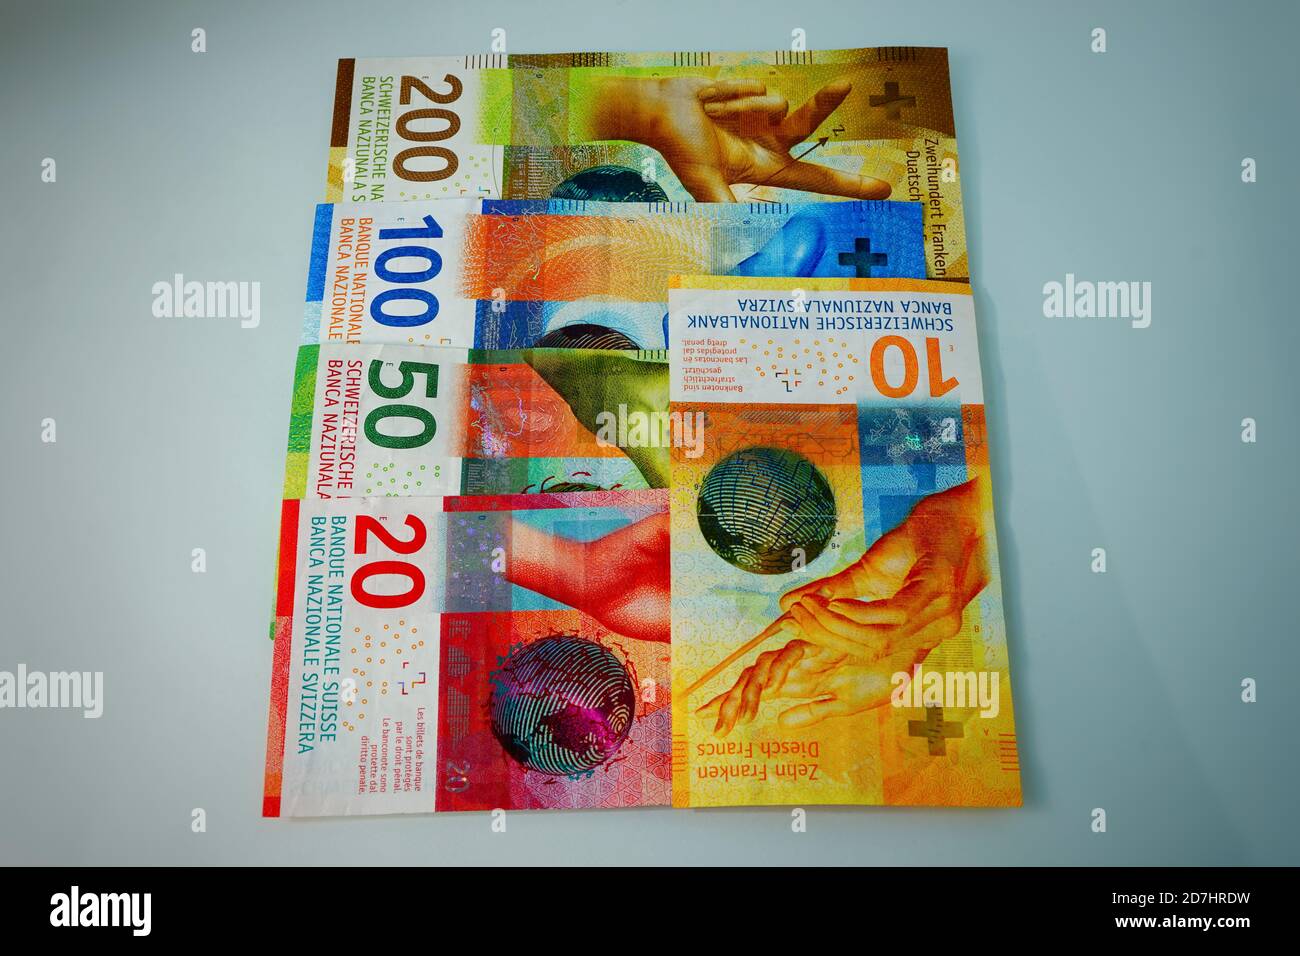 Noten High Resolution Stock Photography and Images - Alamy